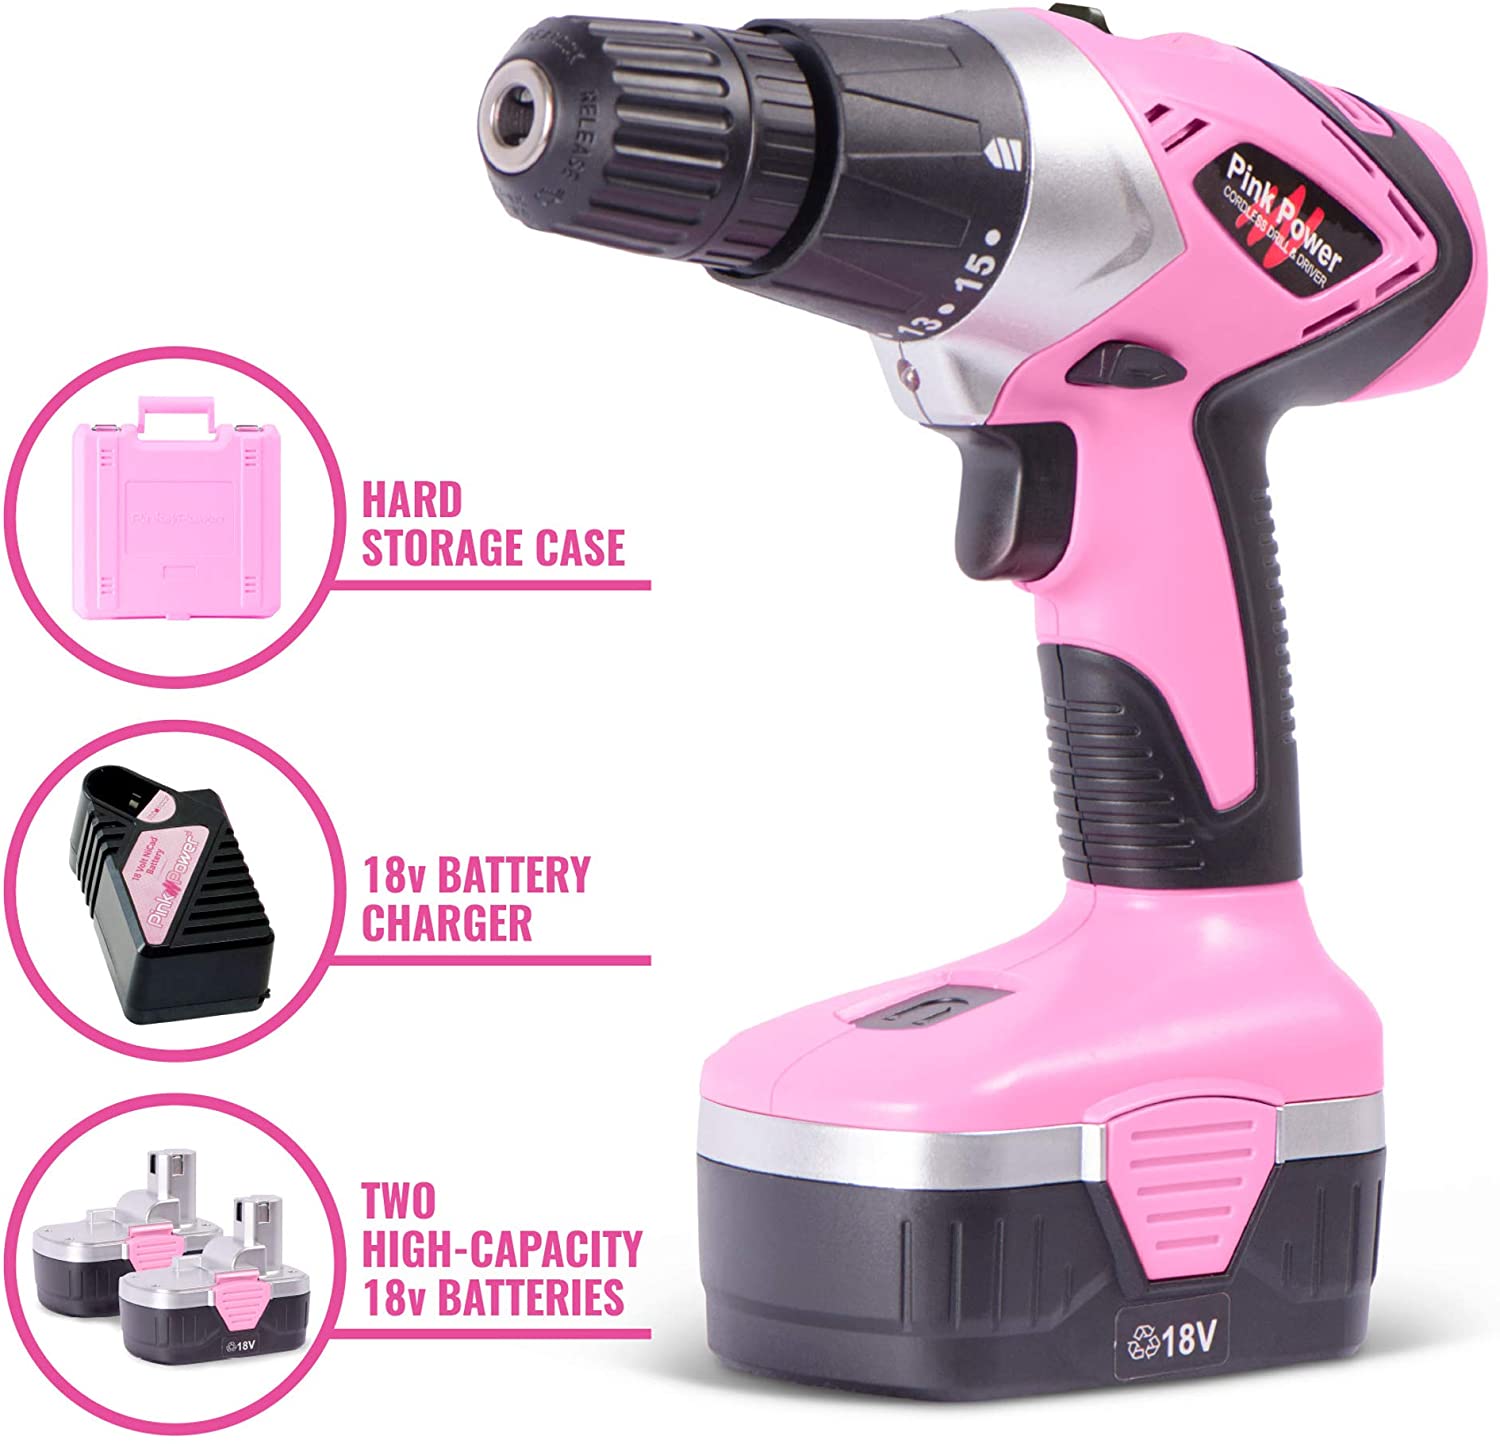 Pink Power Cordless Drill Set for Women - 18V Electric Drill Driver with Tool Case, Batteries, Charger & Drill Bit Set - image 5 of 6